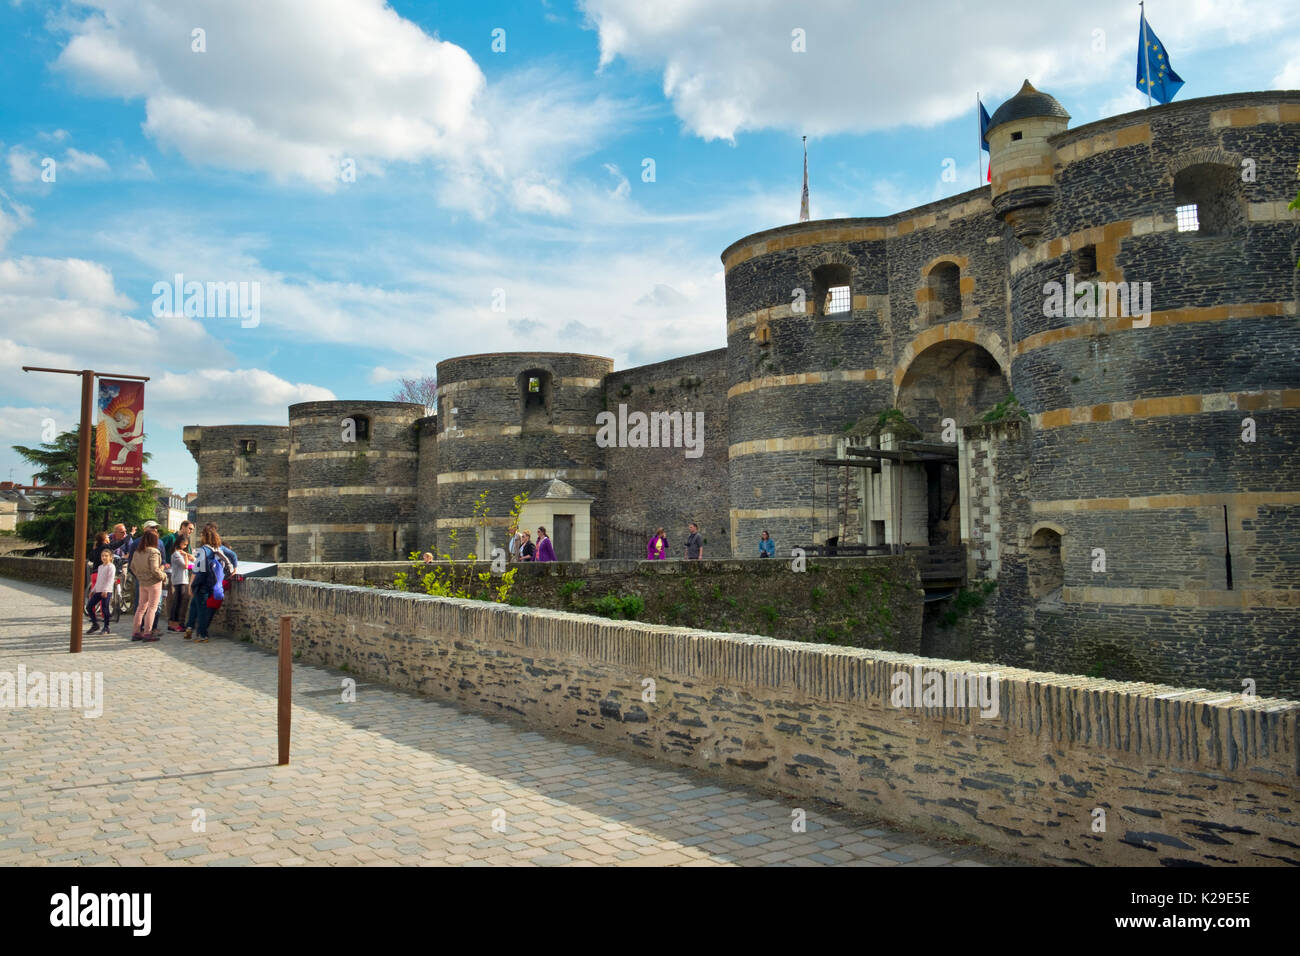 Visitors to the Chateau d'Angers gather at the entrance on a sunny spring afternoon in Angers, Maine-et-Loire, France Stock Photo